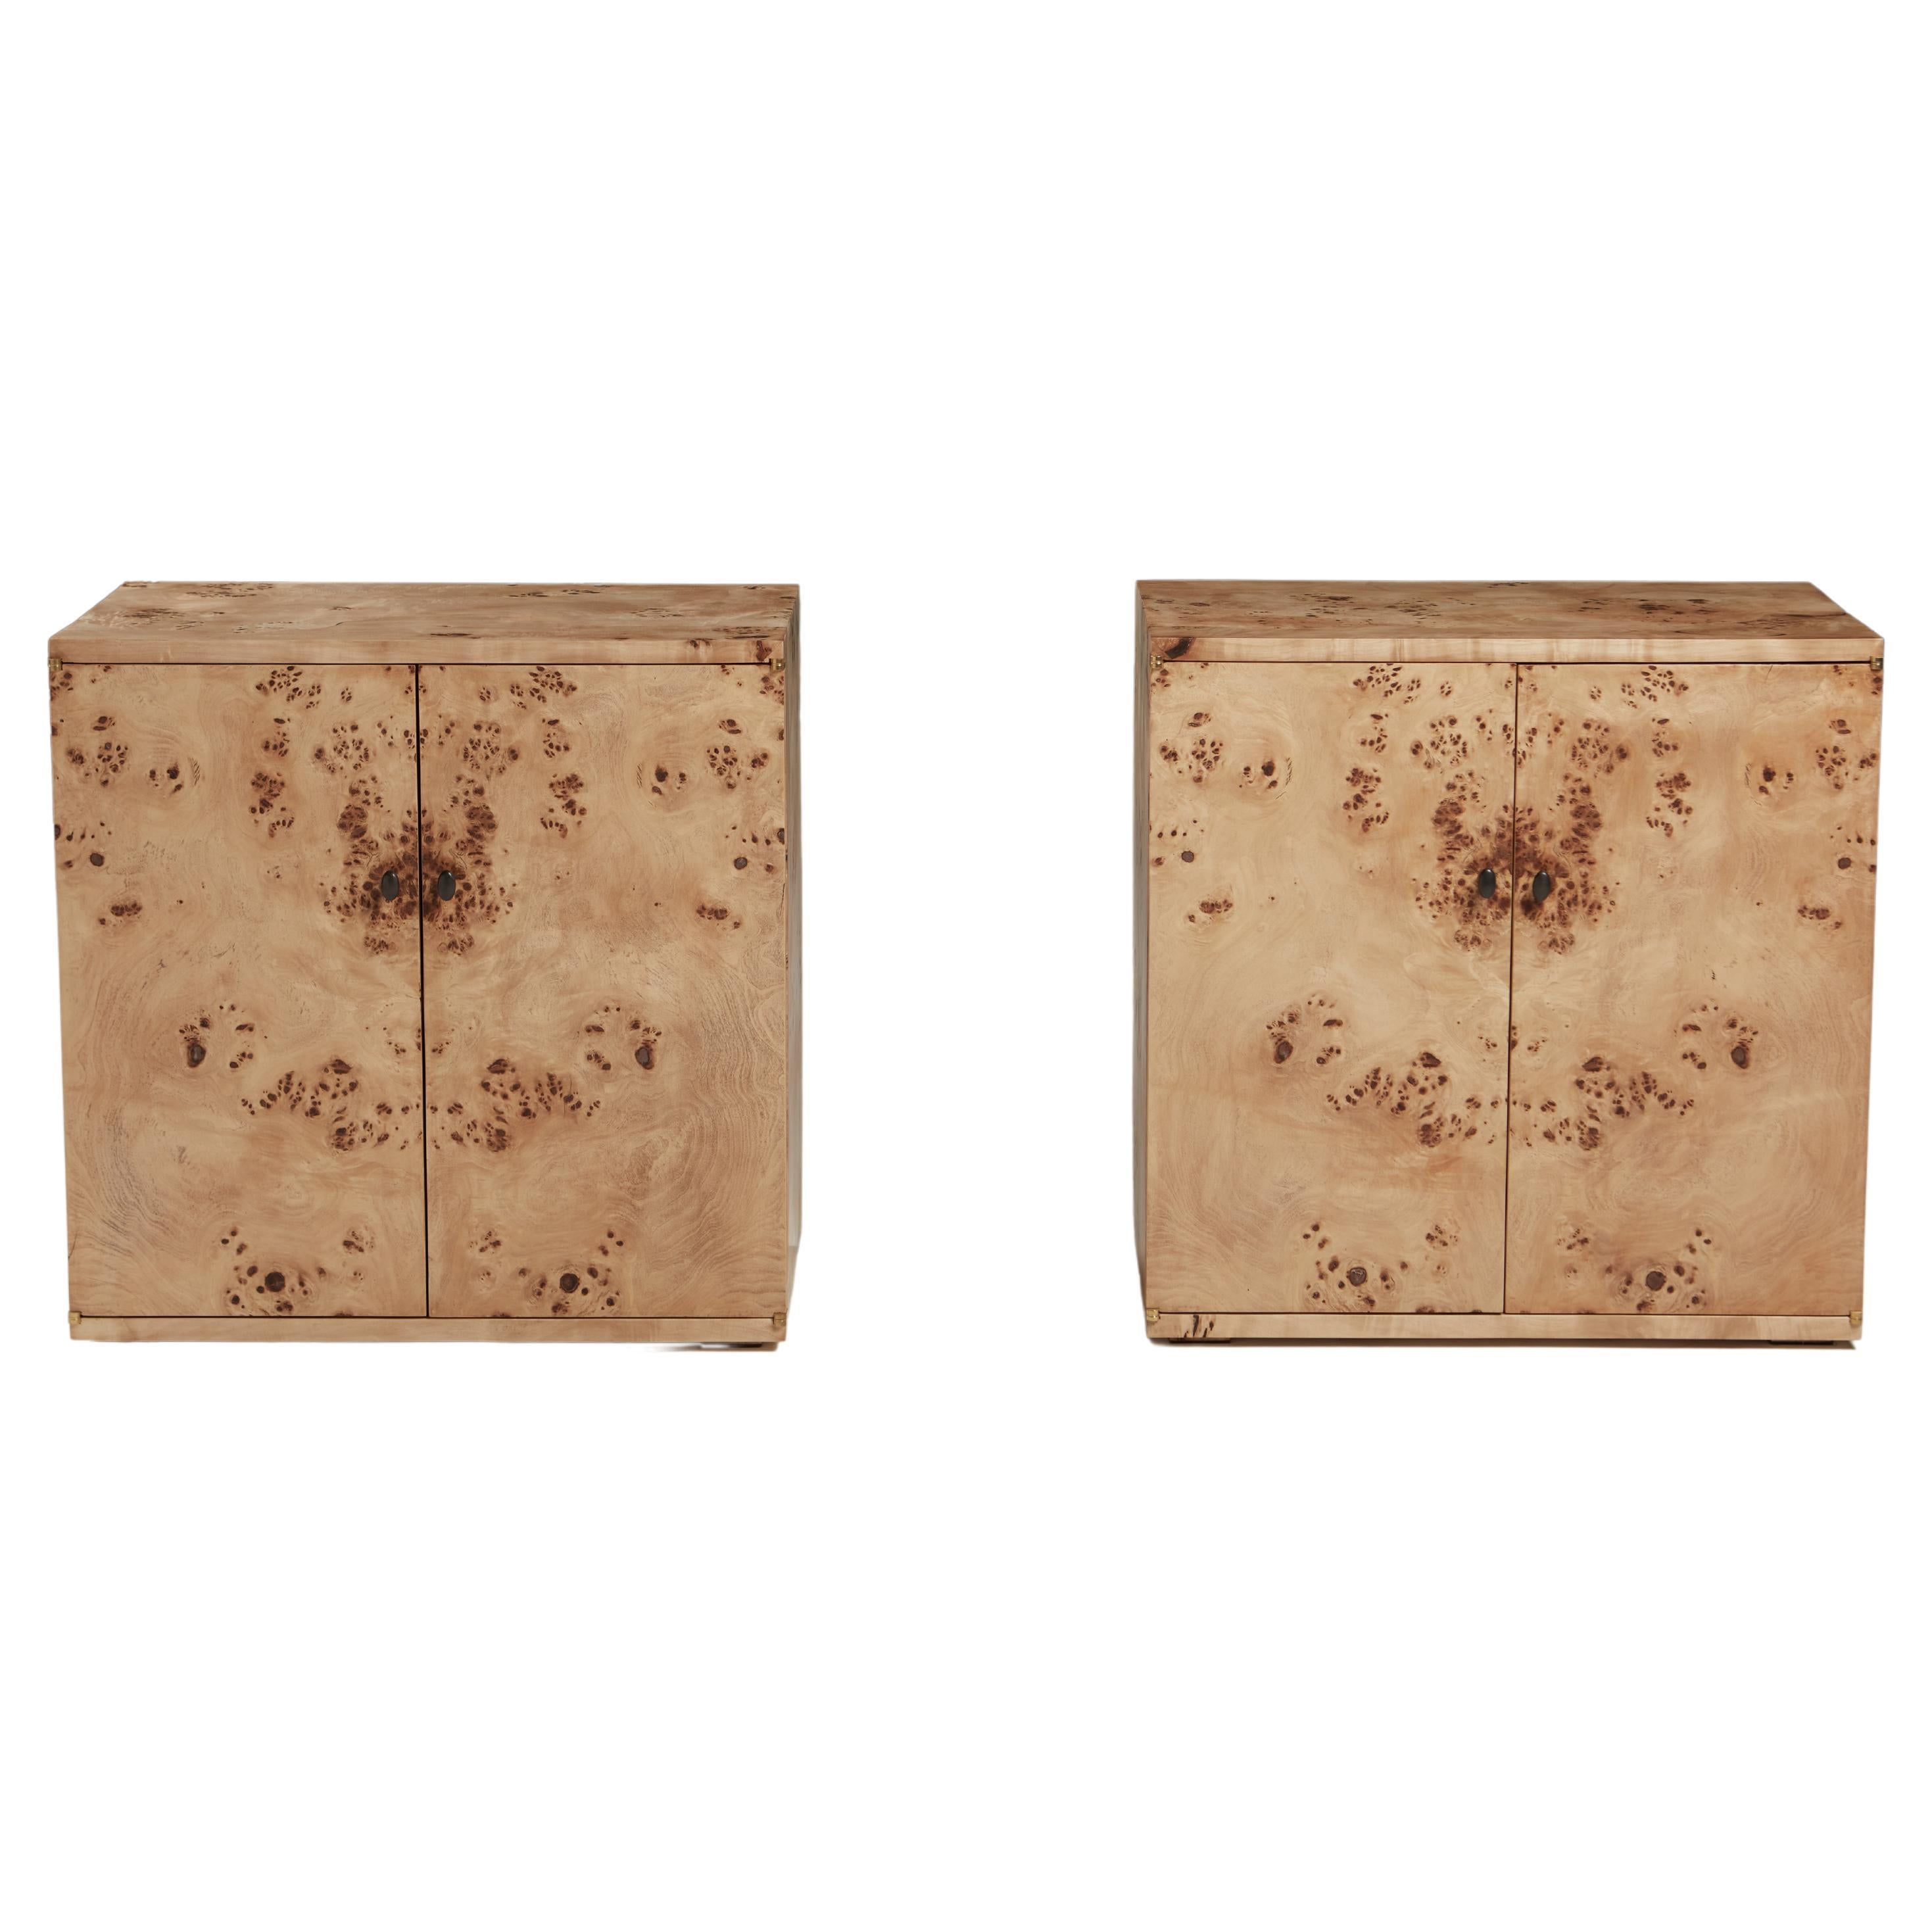 Pair of Book-Matched Bedside or Living Room Cabinets in Mappa Burr.